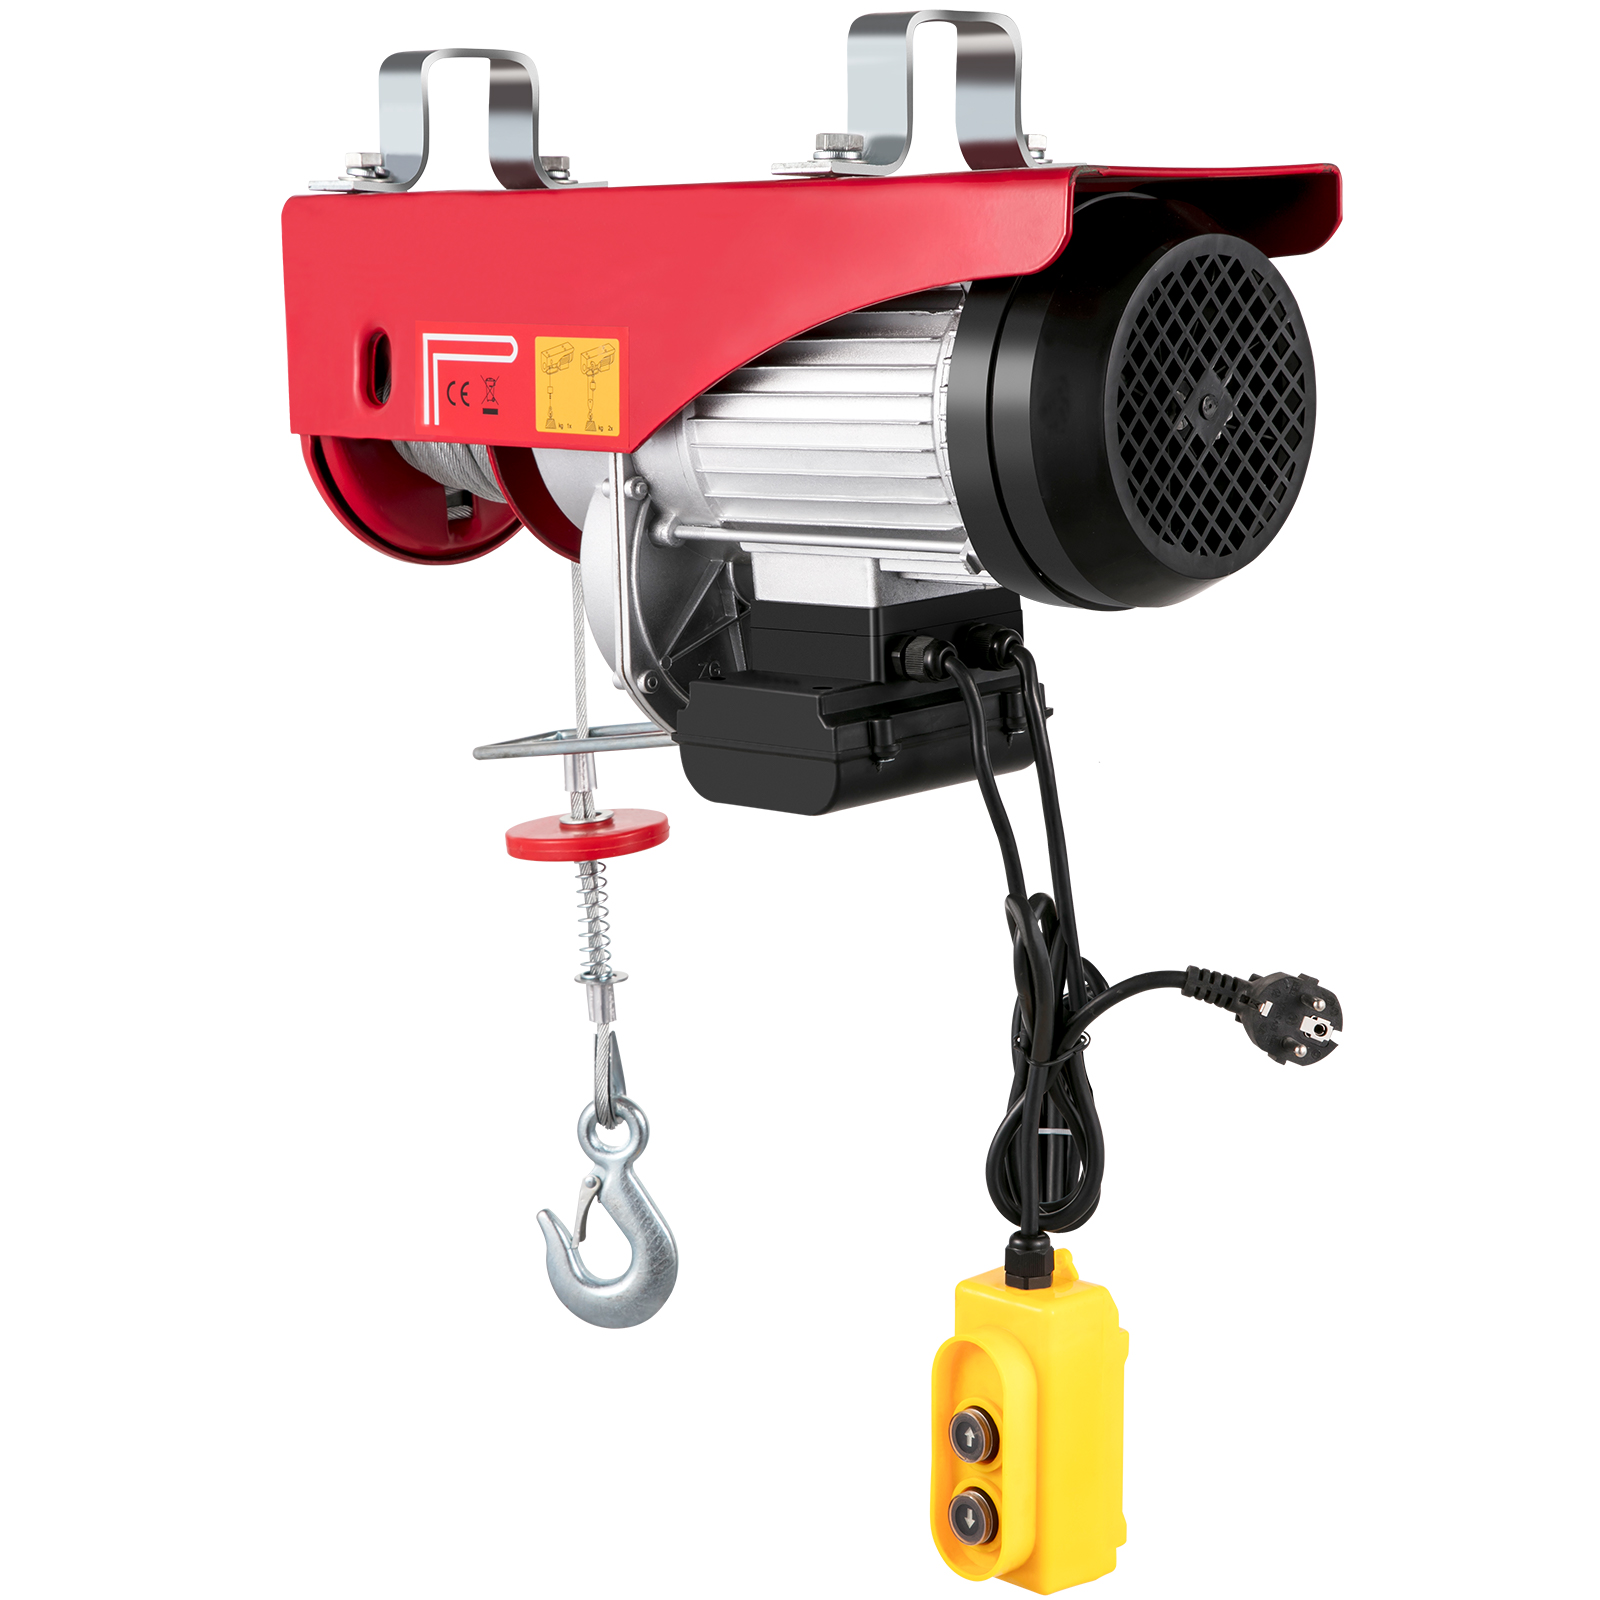 VEVORbrand Lift Electric Hoist 1760lbs, Electric Hoist 110v, Remote Control  Electric Winch Overhead Crane Lift Electric Wire Hoist for Factories,  Warehouses, Construction, Building, Goods Lifting